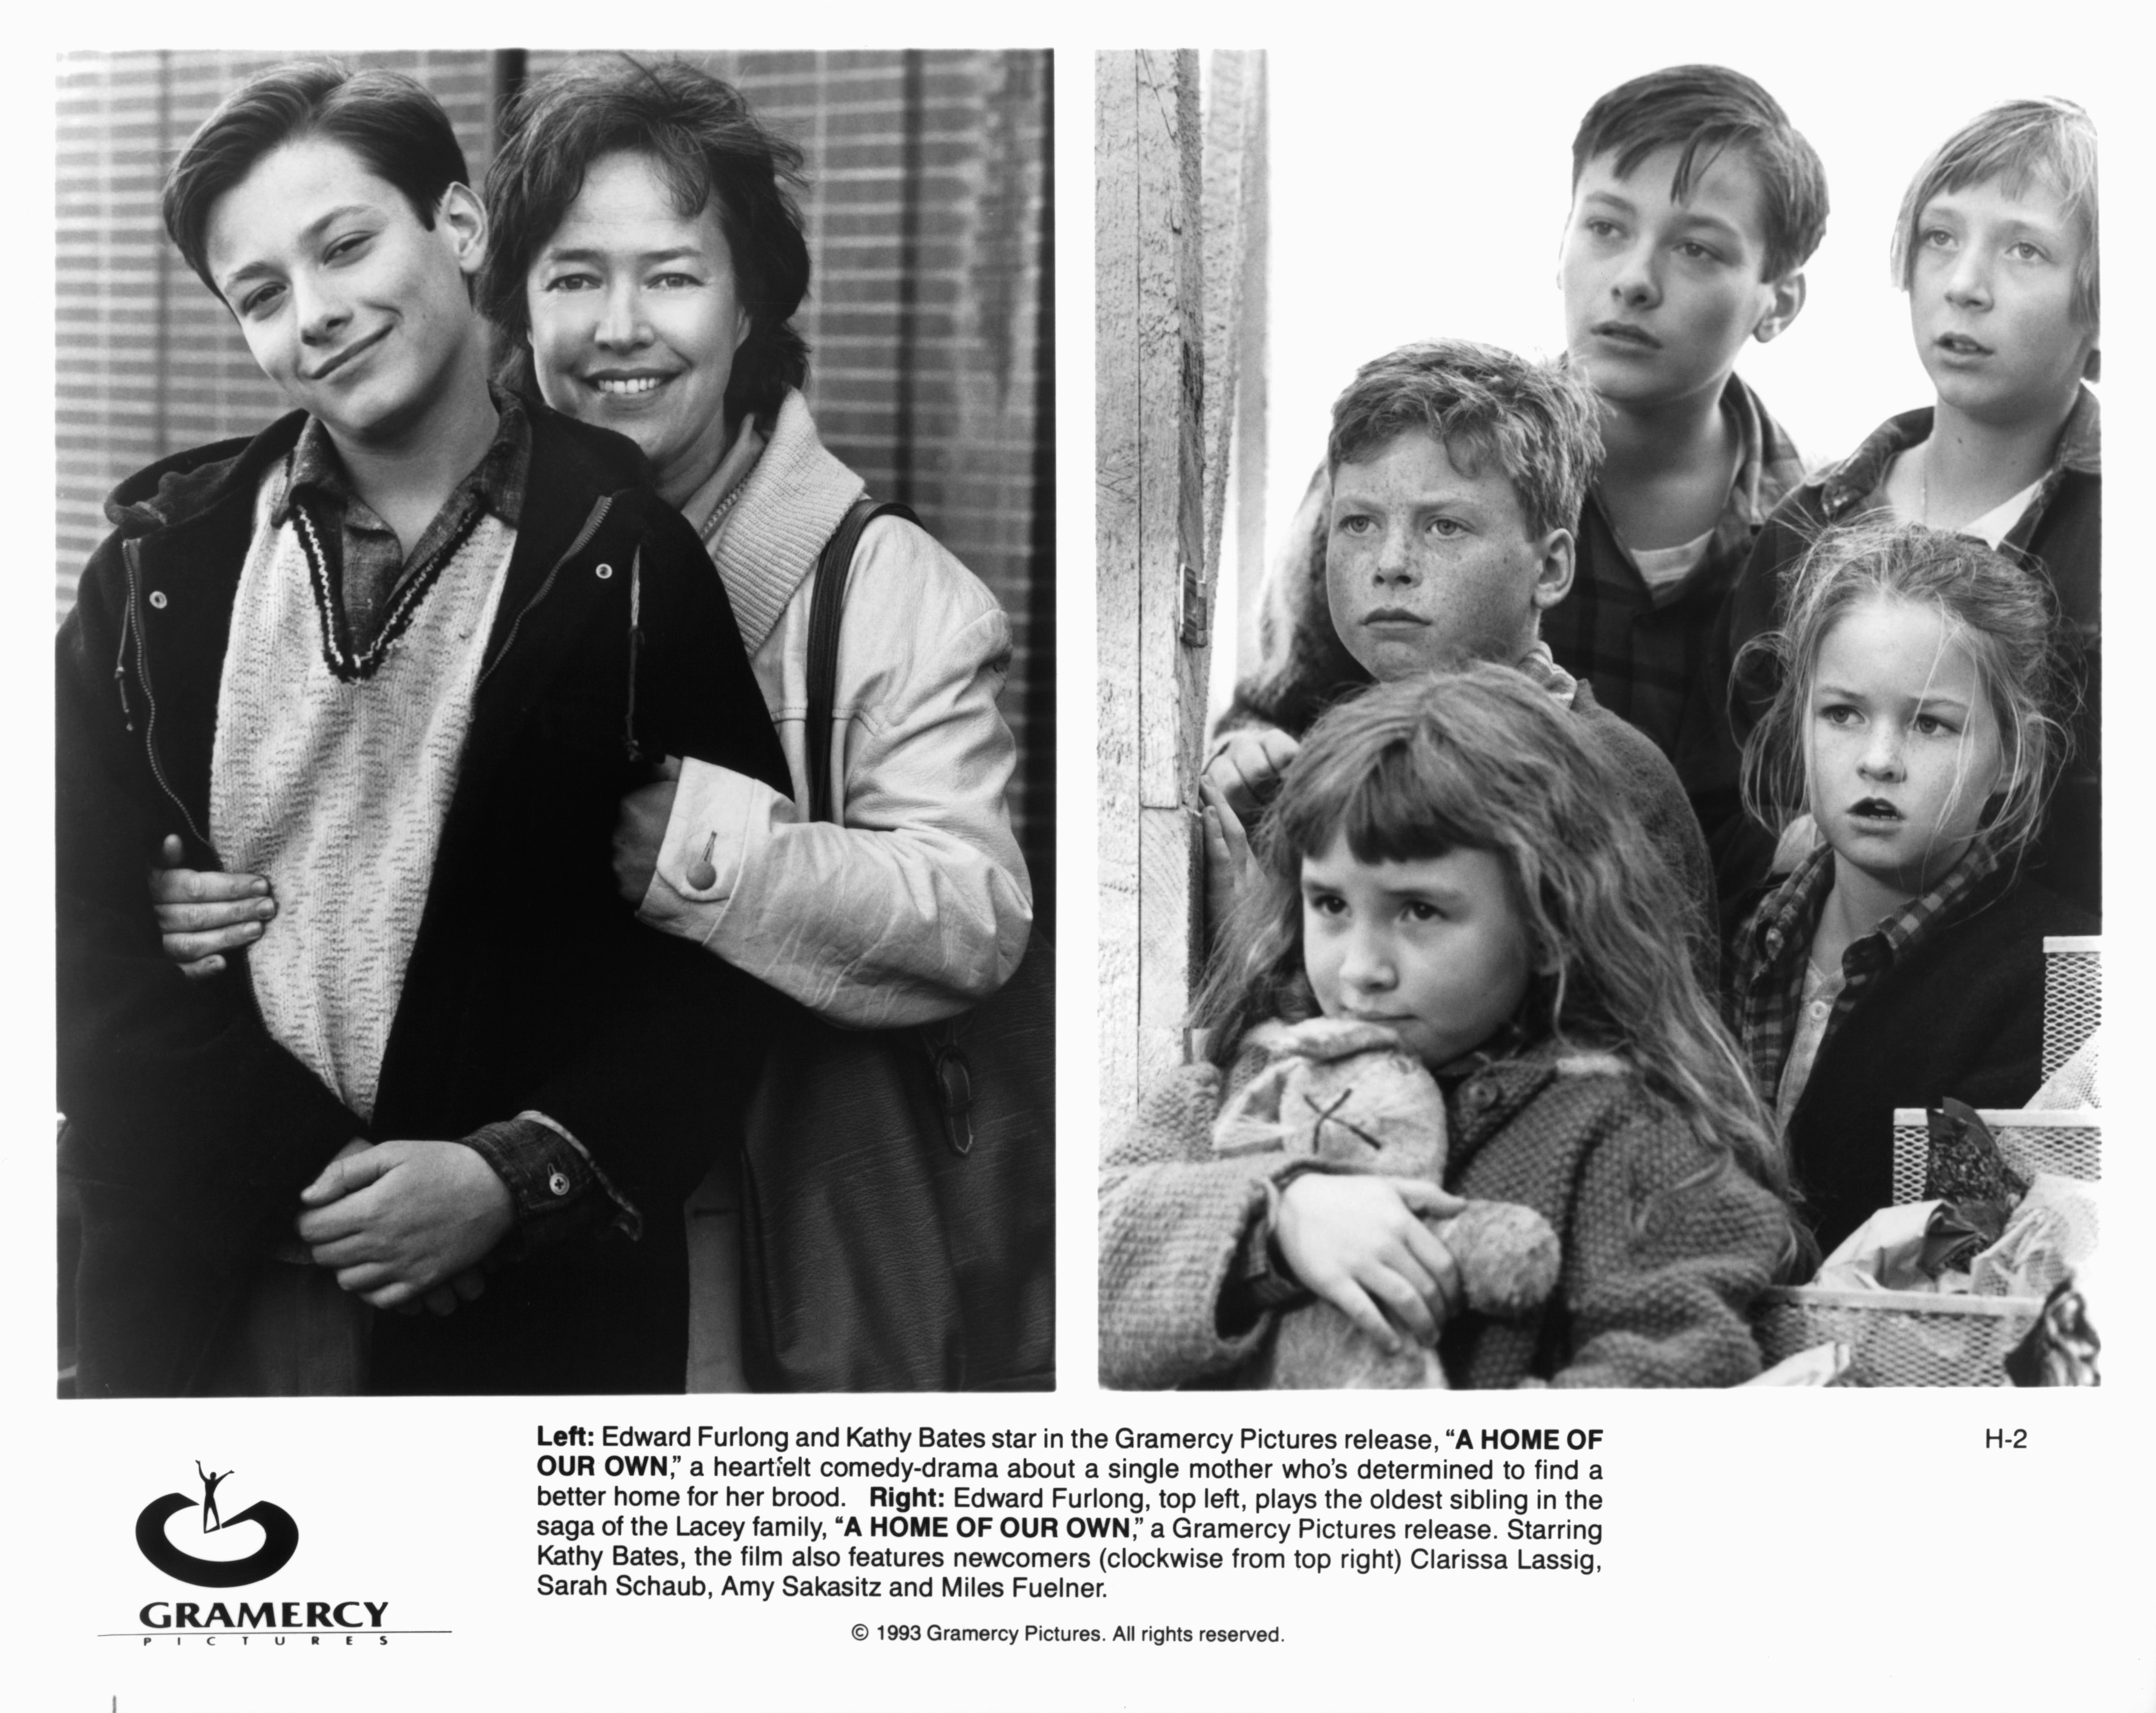 Kathy Bates and Edward Furlong (left) and Lacey Family (right) in a scene from the film 'A Home Of Our Own', 1993. | Source: Getty Images